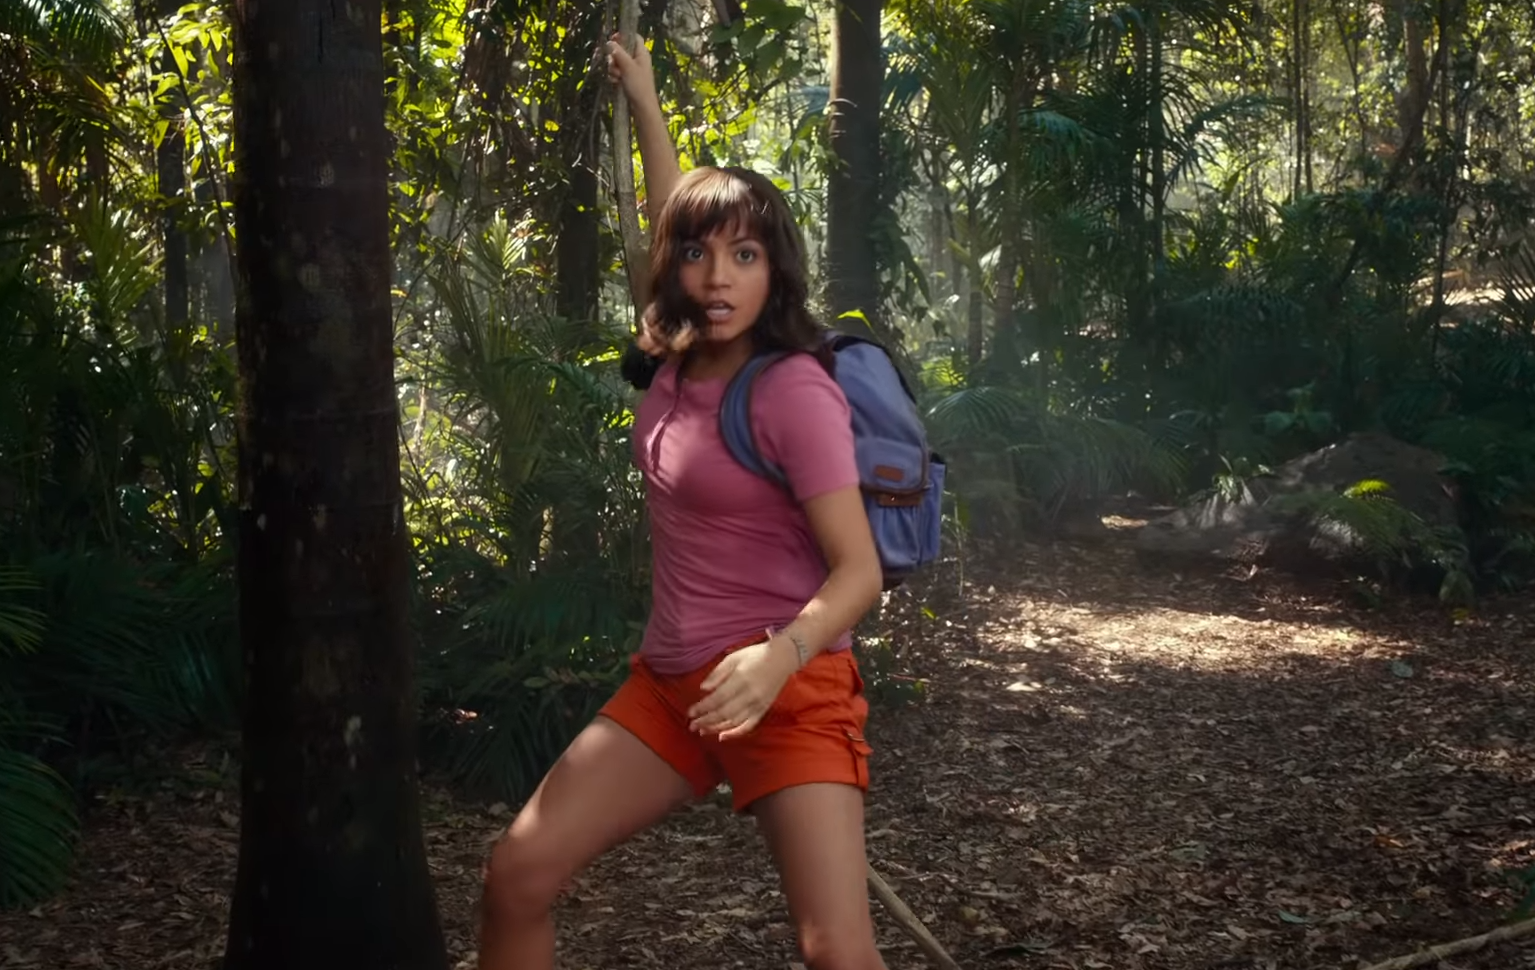 Dora And The Lost City Of Gold 2019 Movie Wallpapers